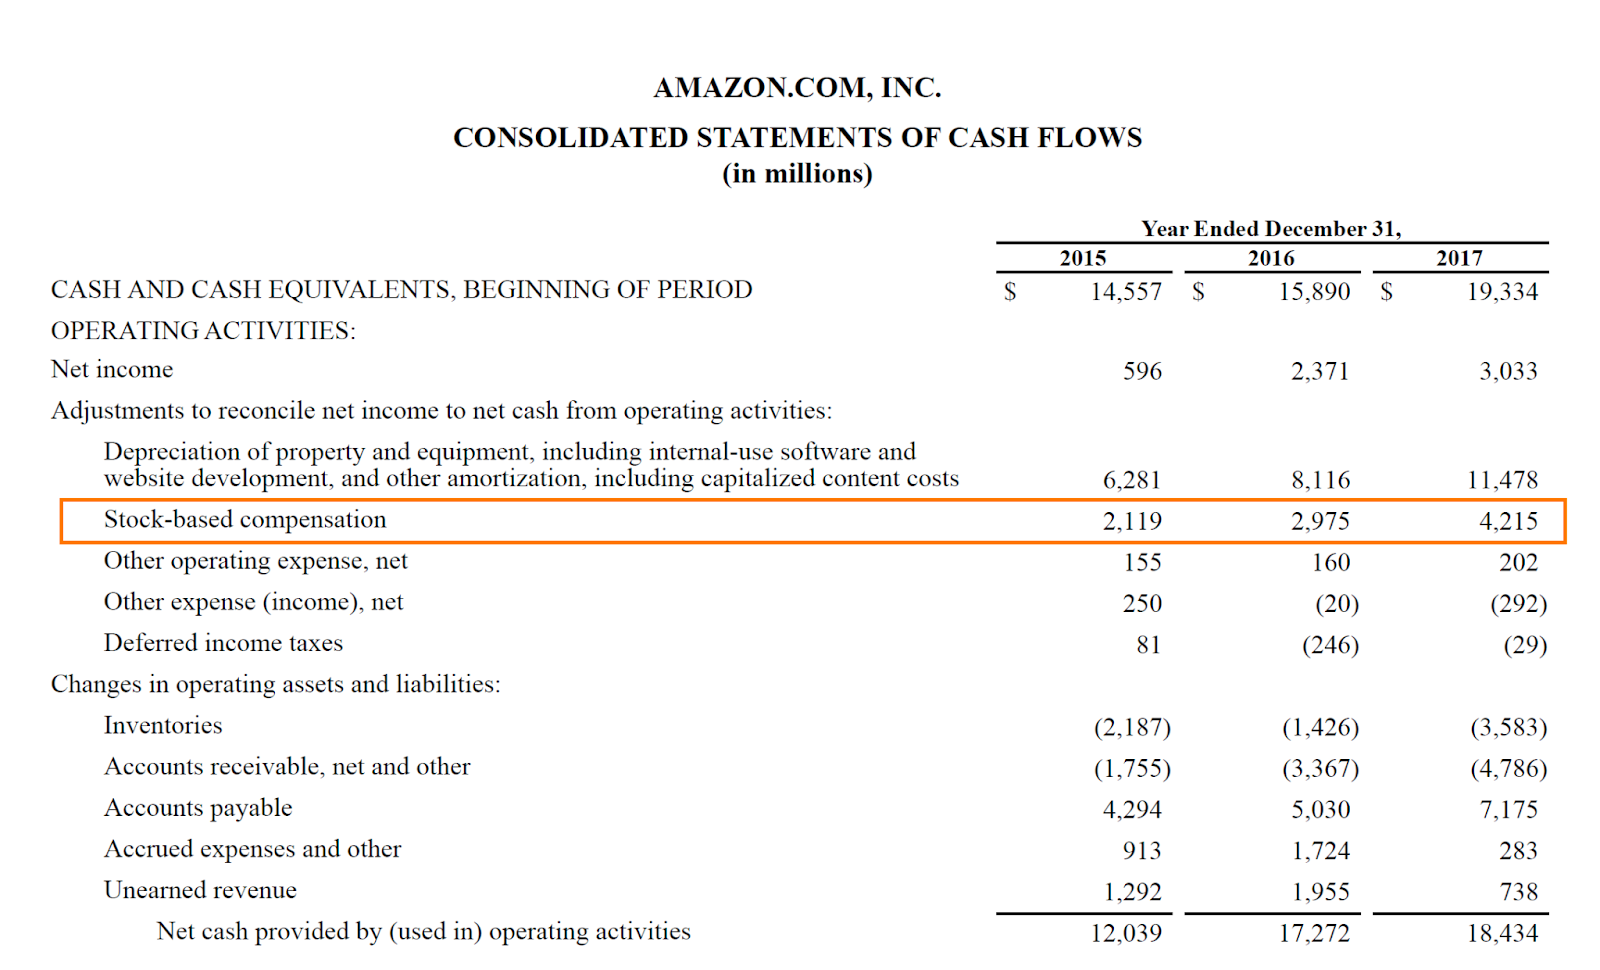 Screen shot showing an example of Amazon’s (AMZN) cash flow statement with emphasis on Stock-based compensation